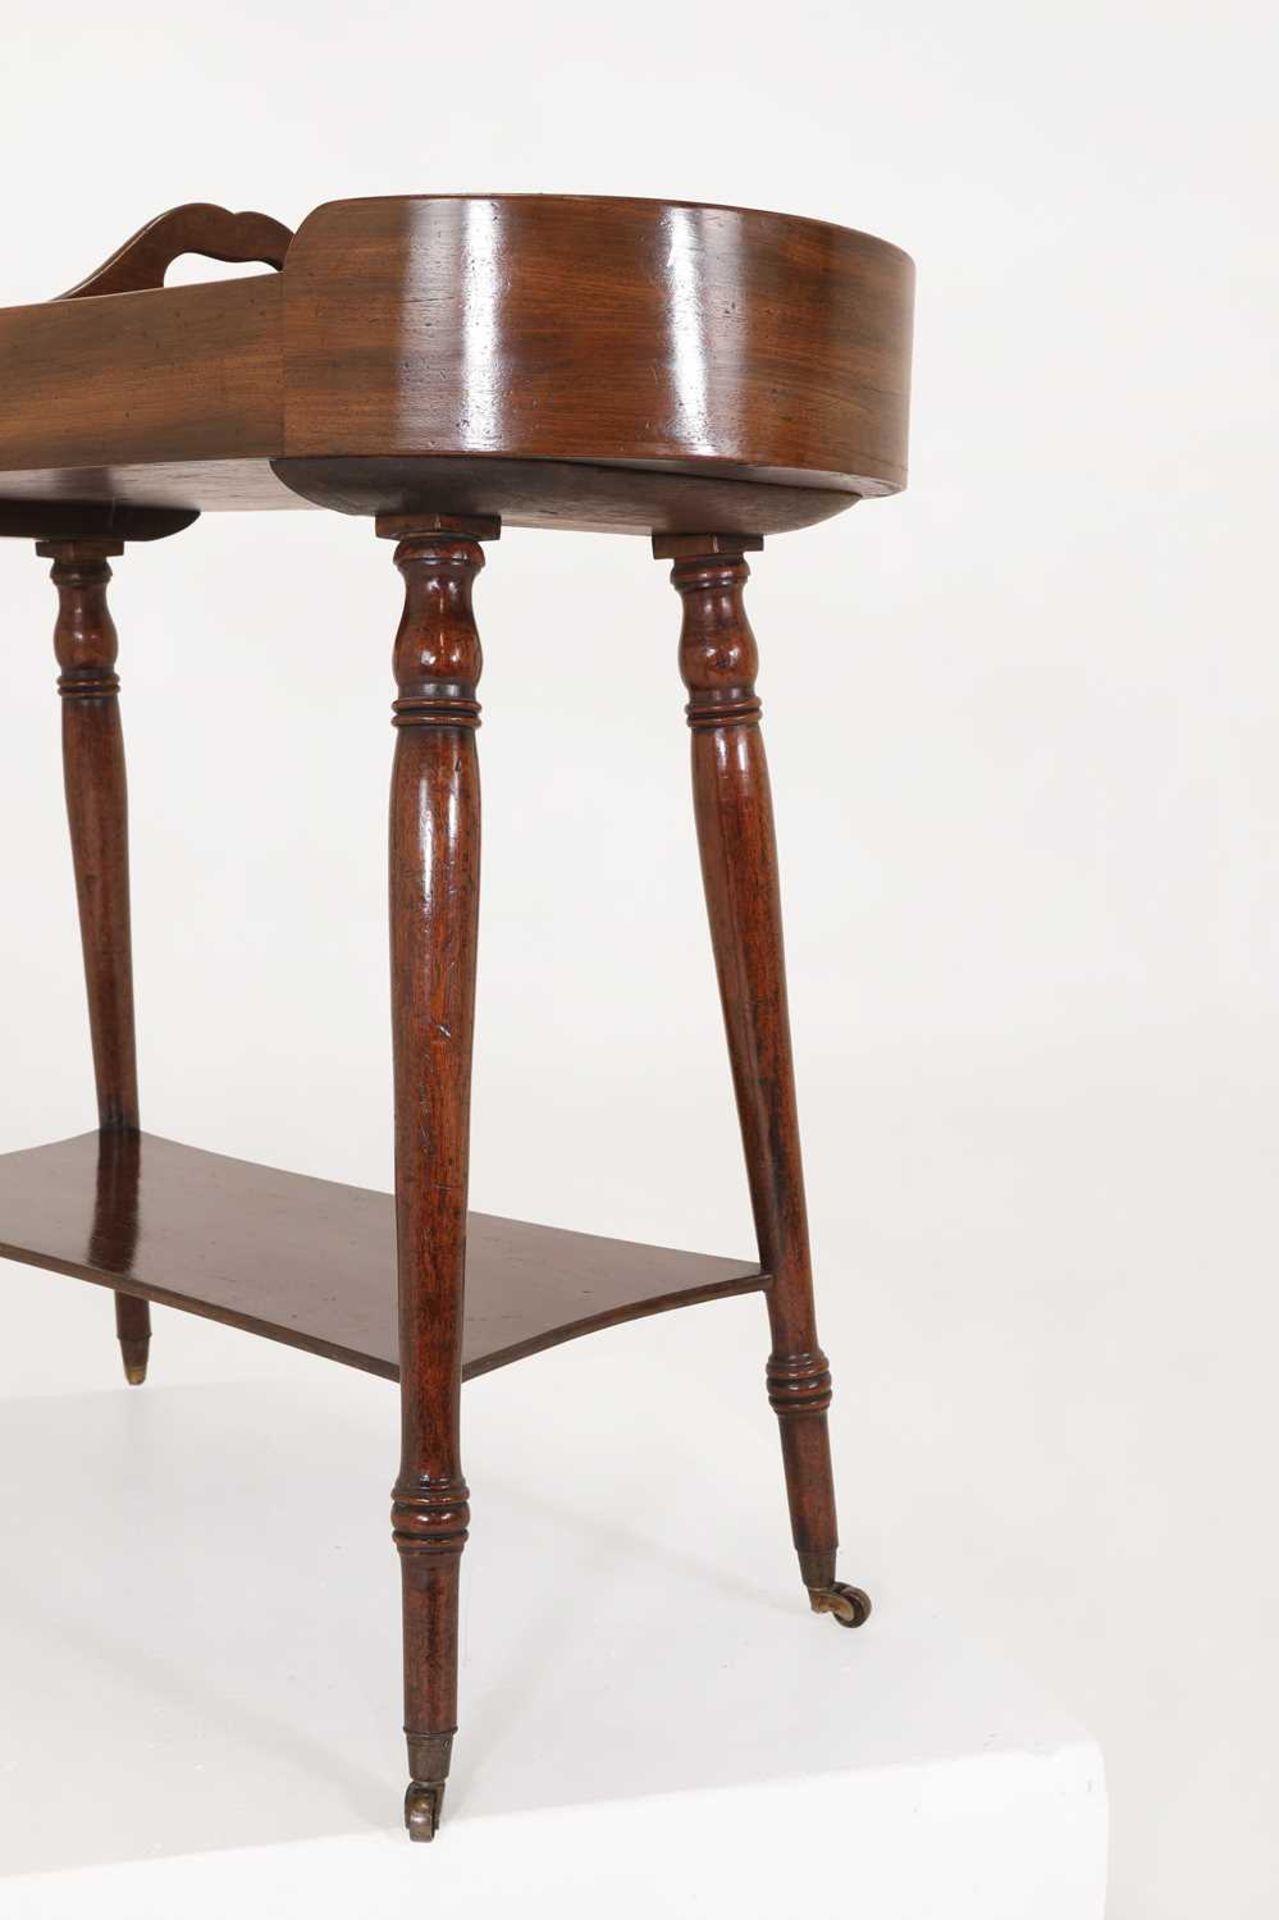 A George III mahogany tray on stand, - Image 7 of 34